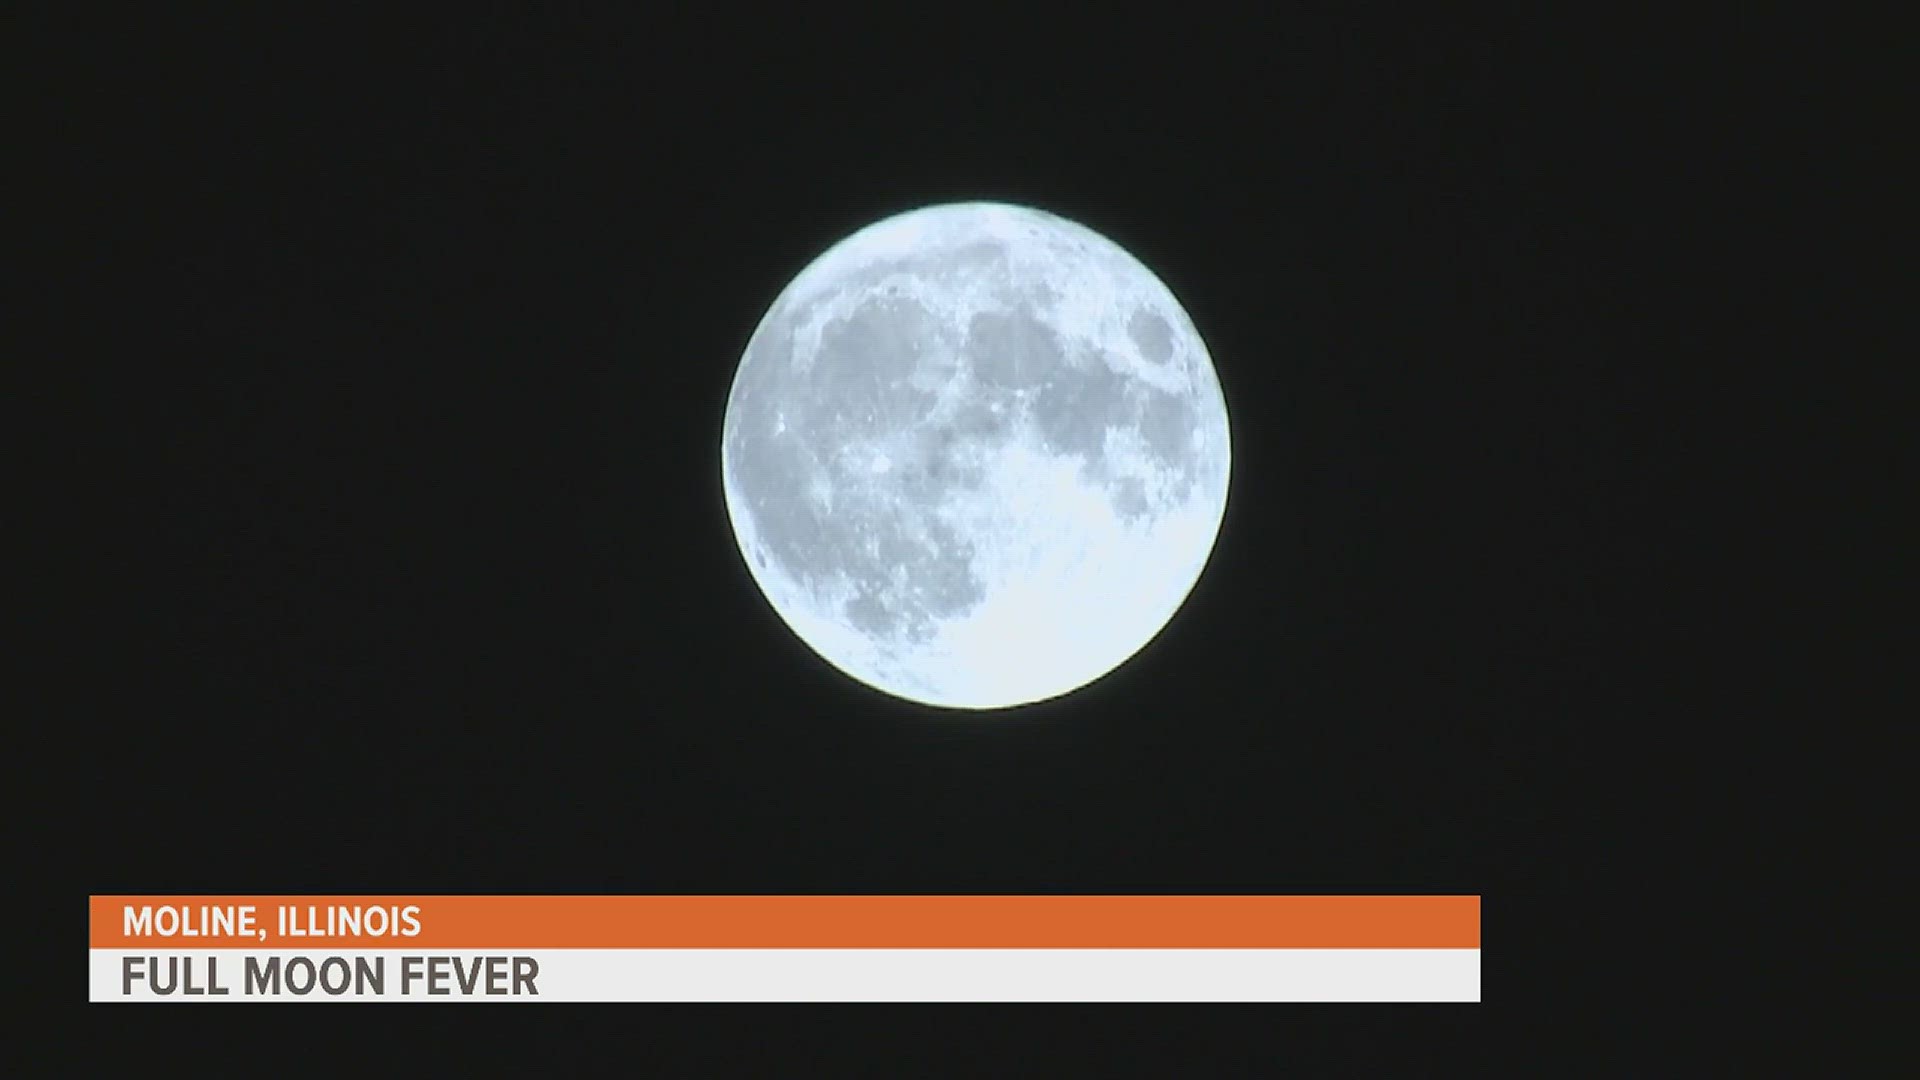 The Harvest Moon was the last supermoon of the year. It will take place again in 2024 on Sept. 17.